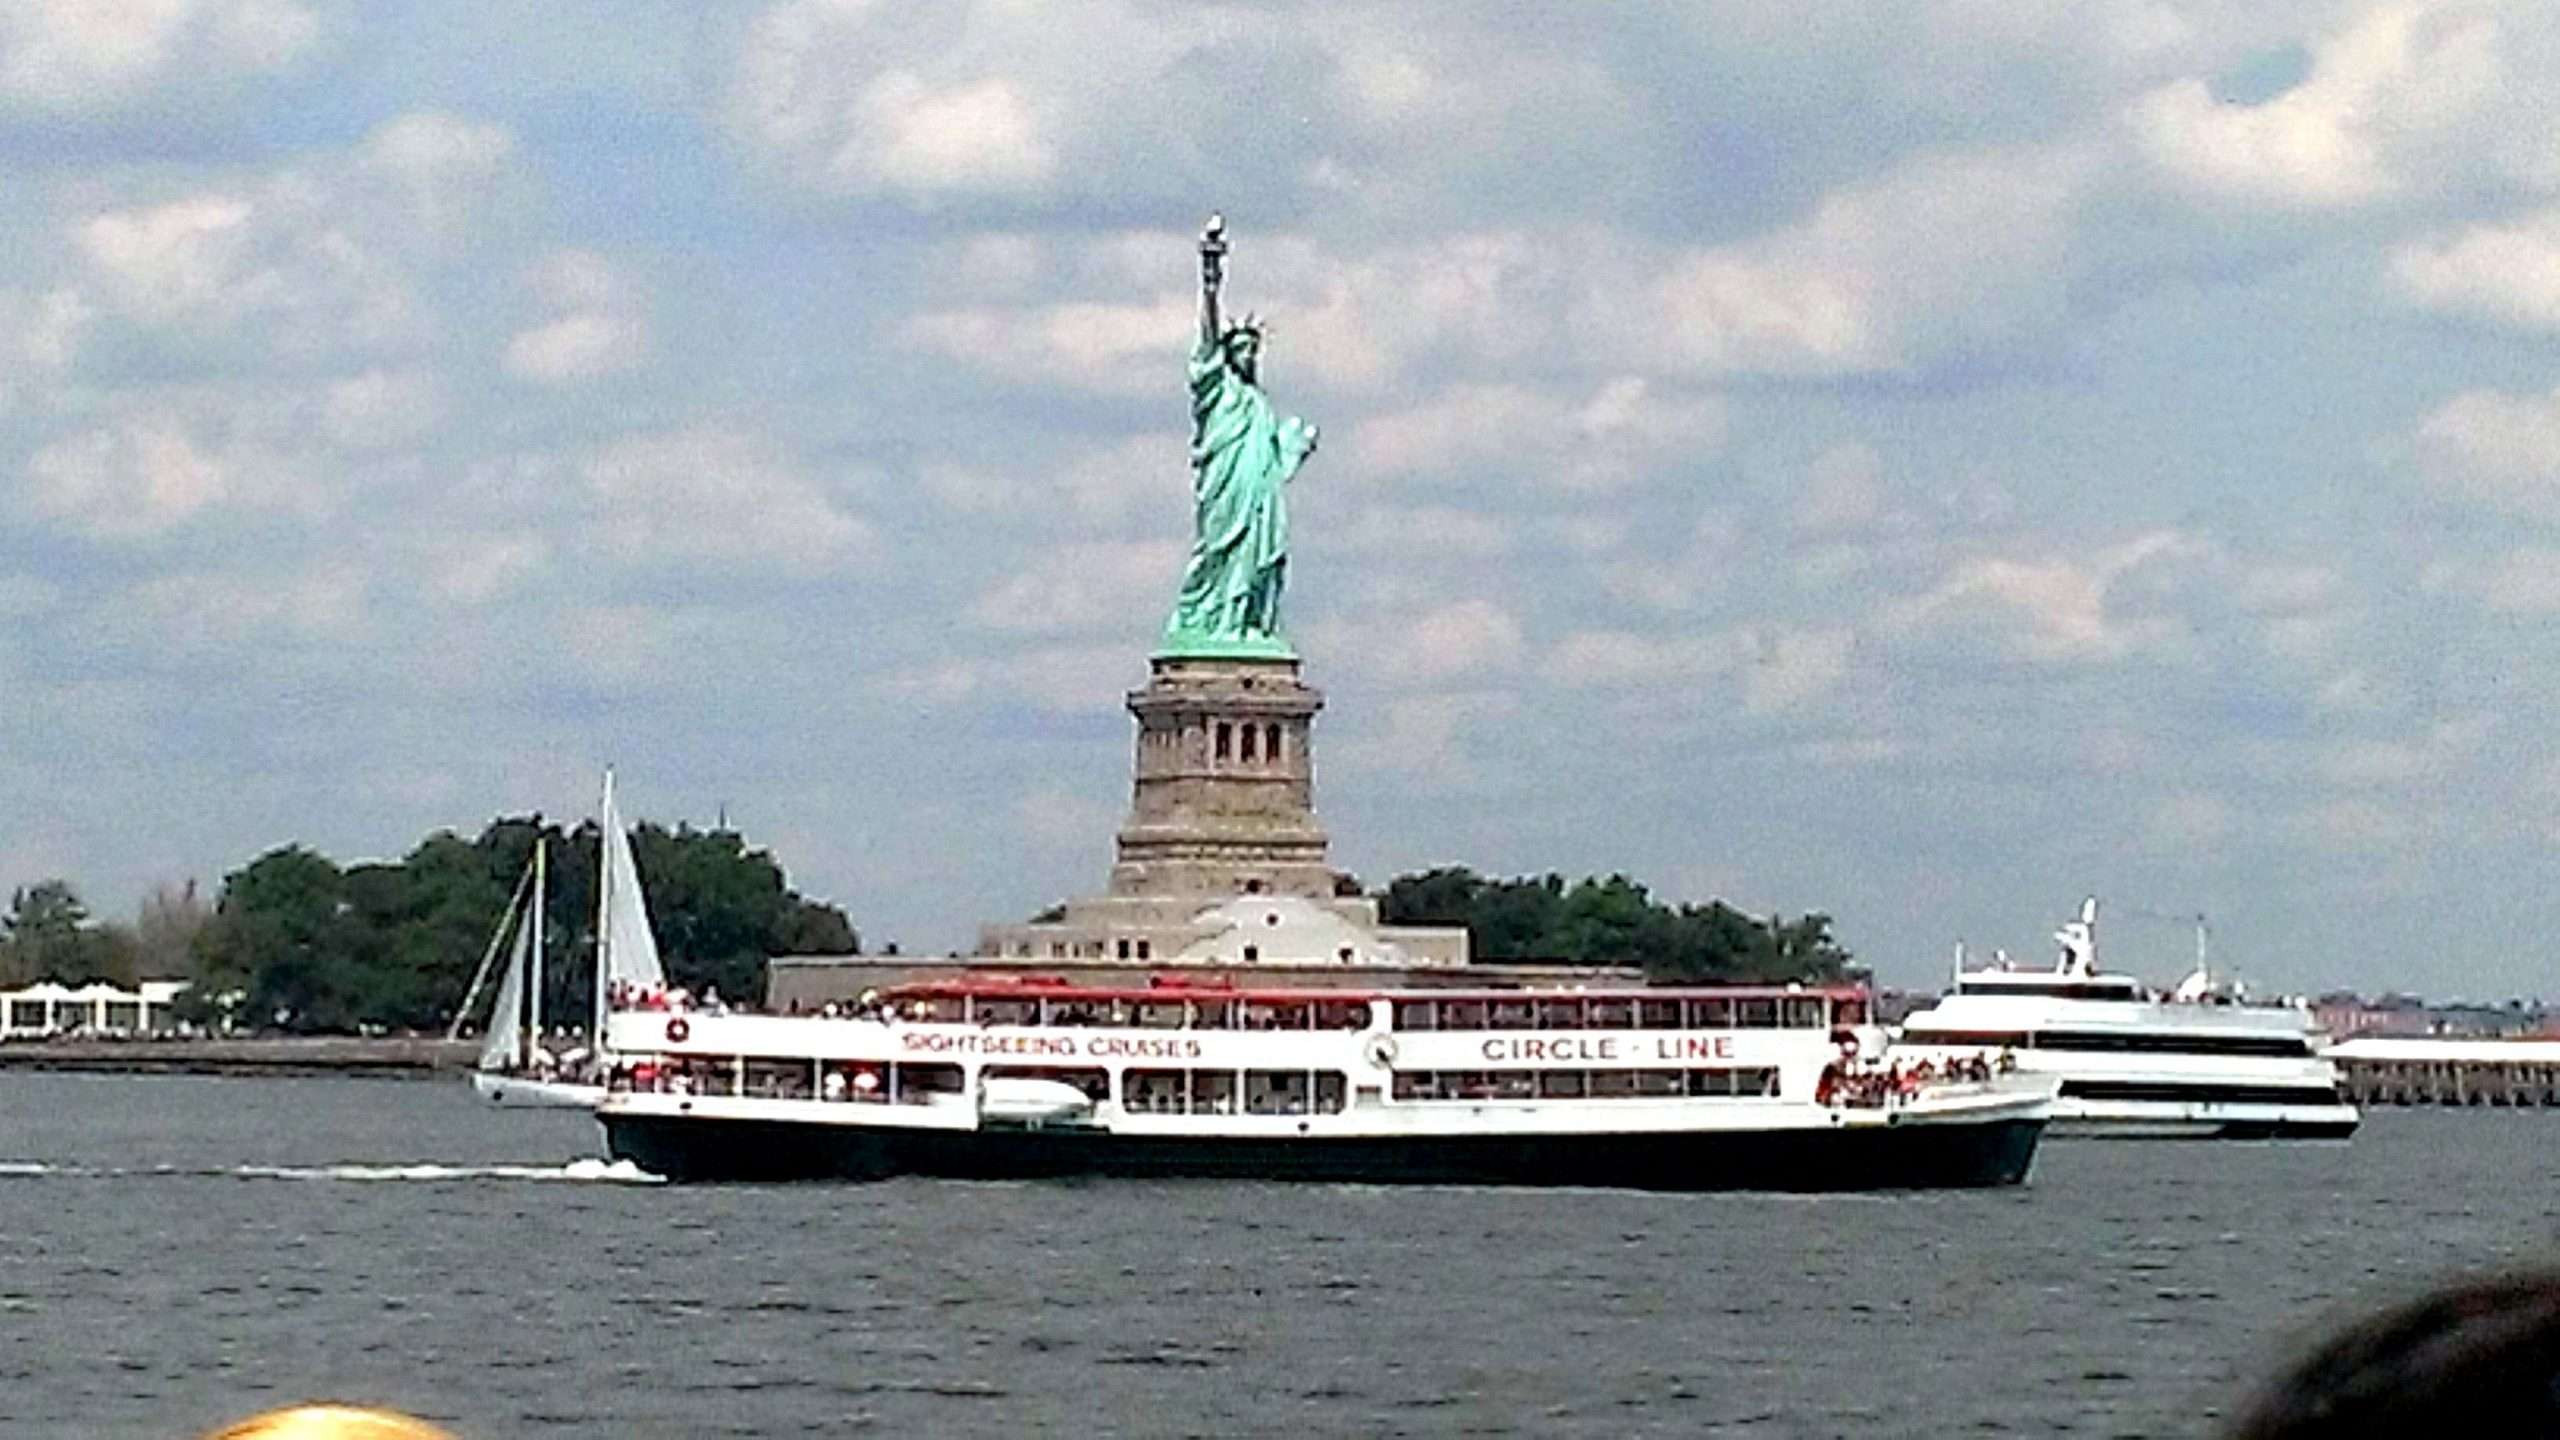 Statue of Liberty and Circle line cruise